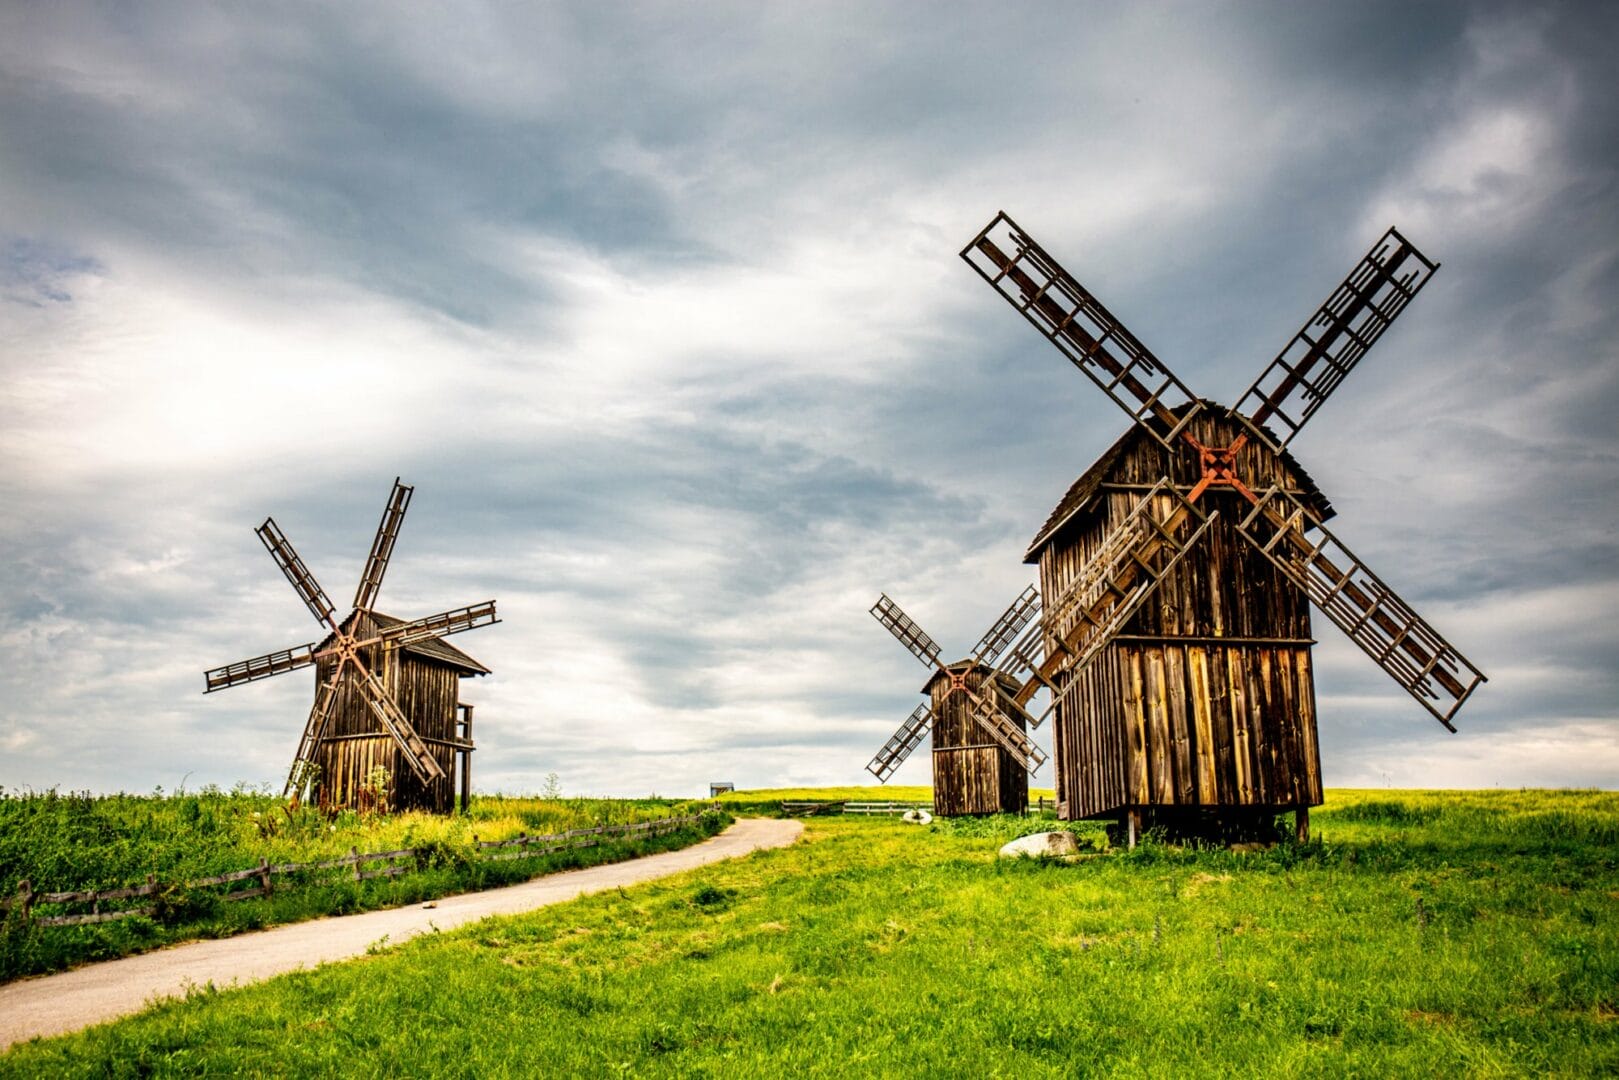 The windmills in Vodianyky are very similar to the old windmills built in the Dutch village of Kinderdijk 